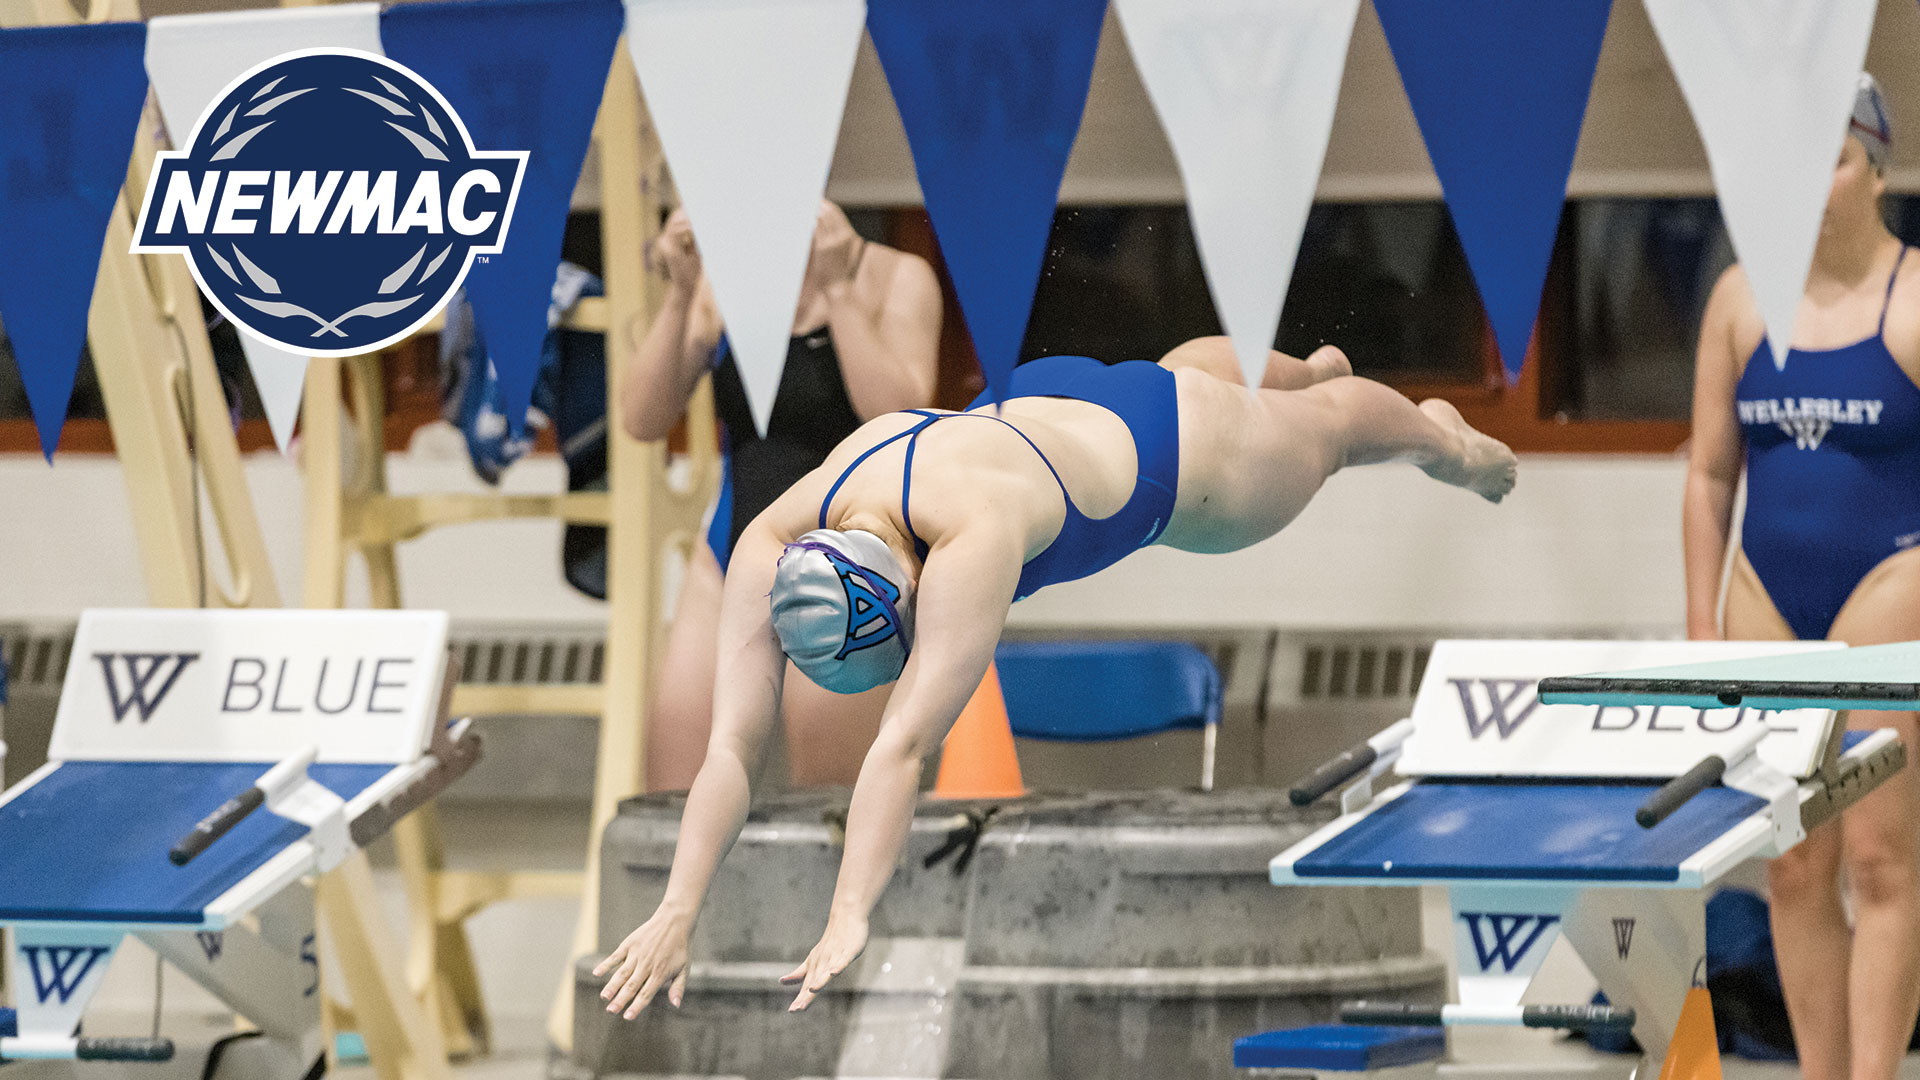 Wellesley set for the 2022 NEWMAC Championships (Frank Poulin Photography)